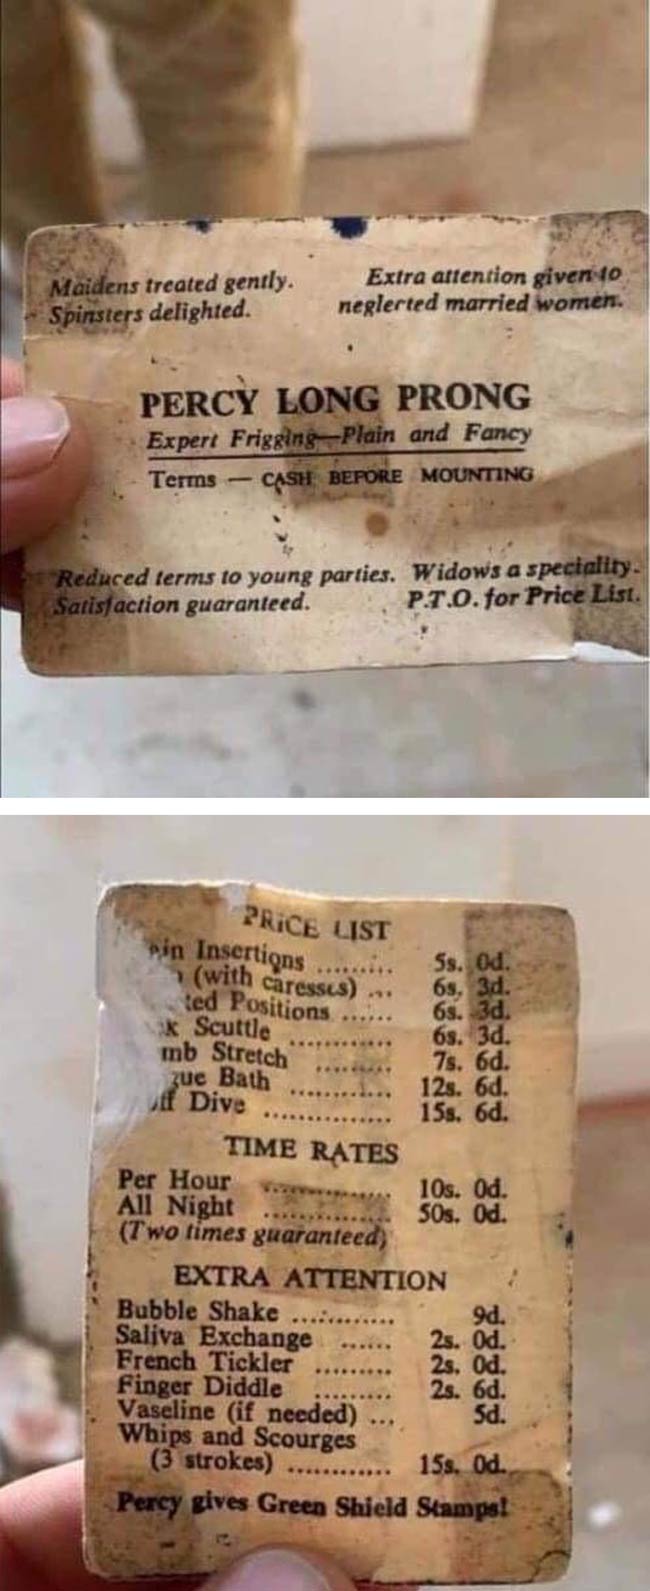 Business card for a 'Percy Long Prong' found underneath floorboards of a house